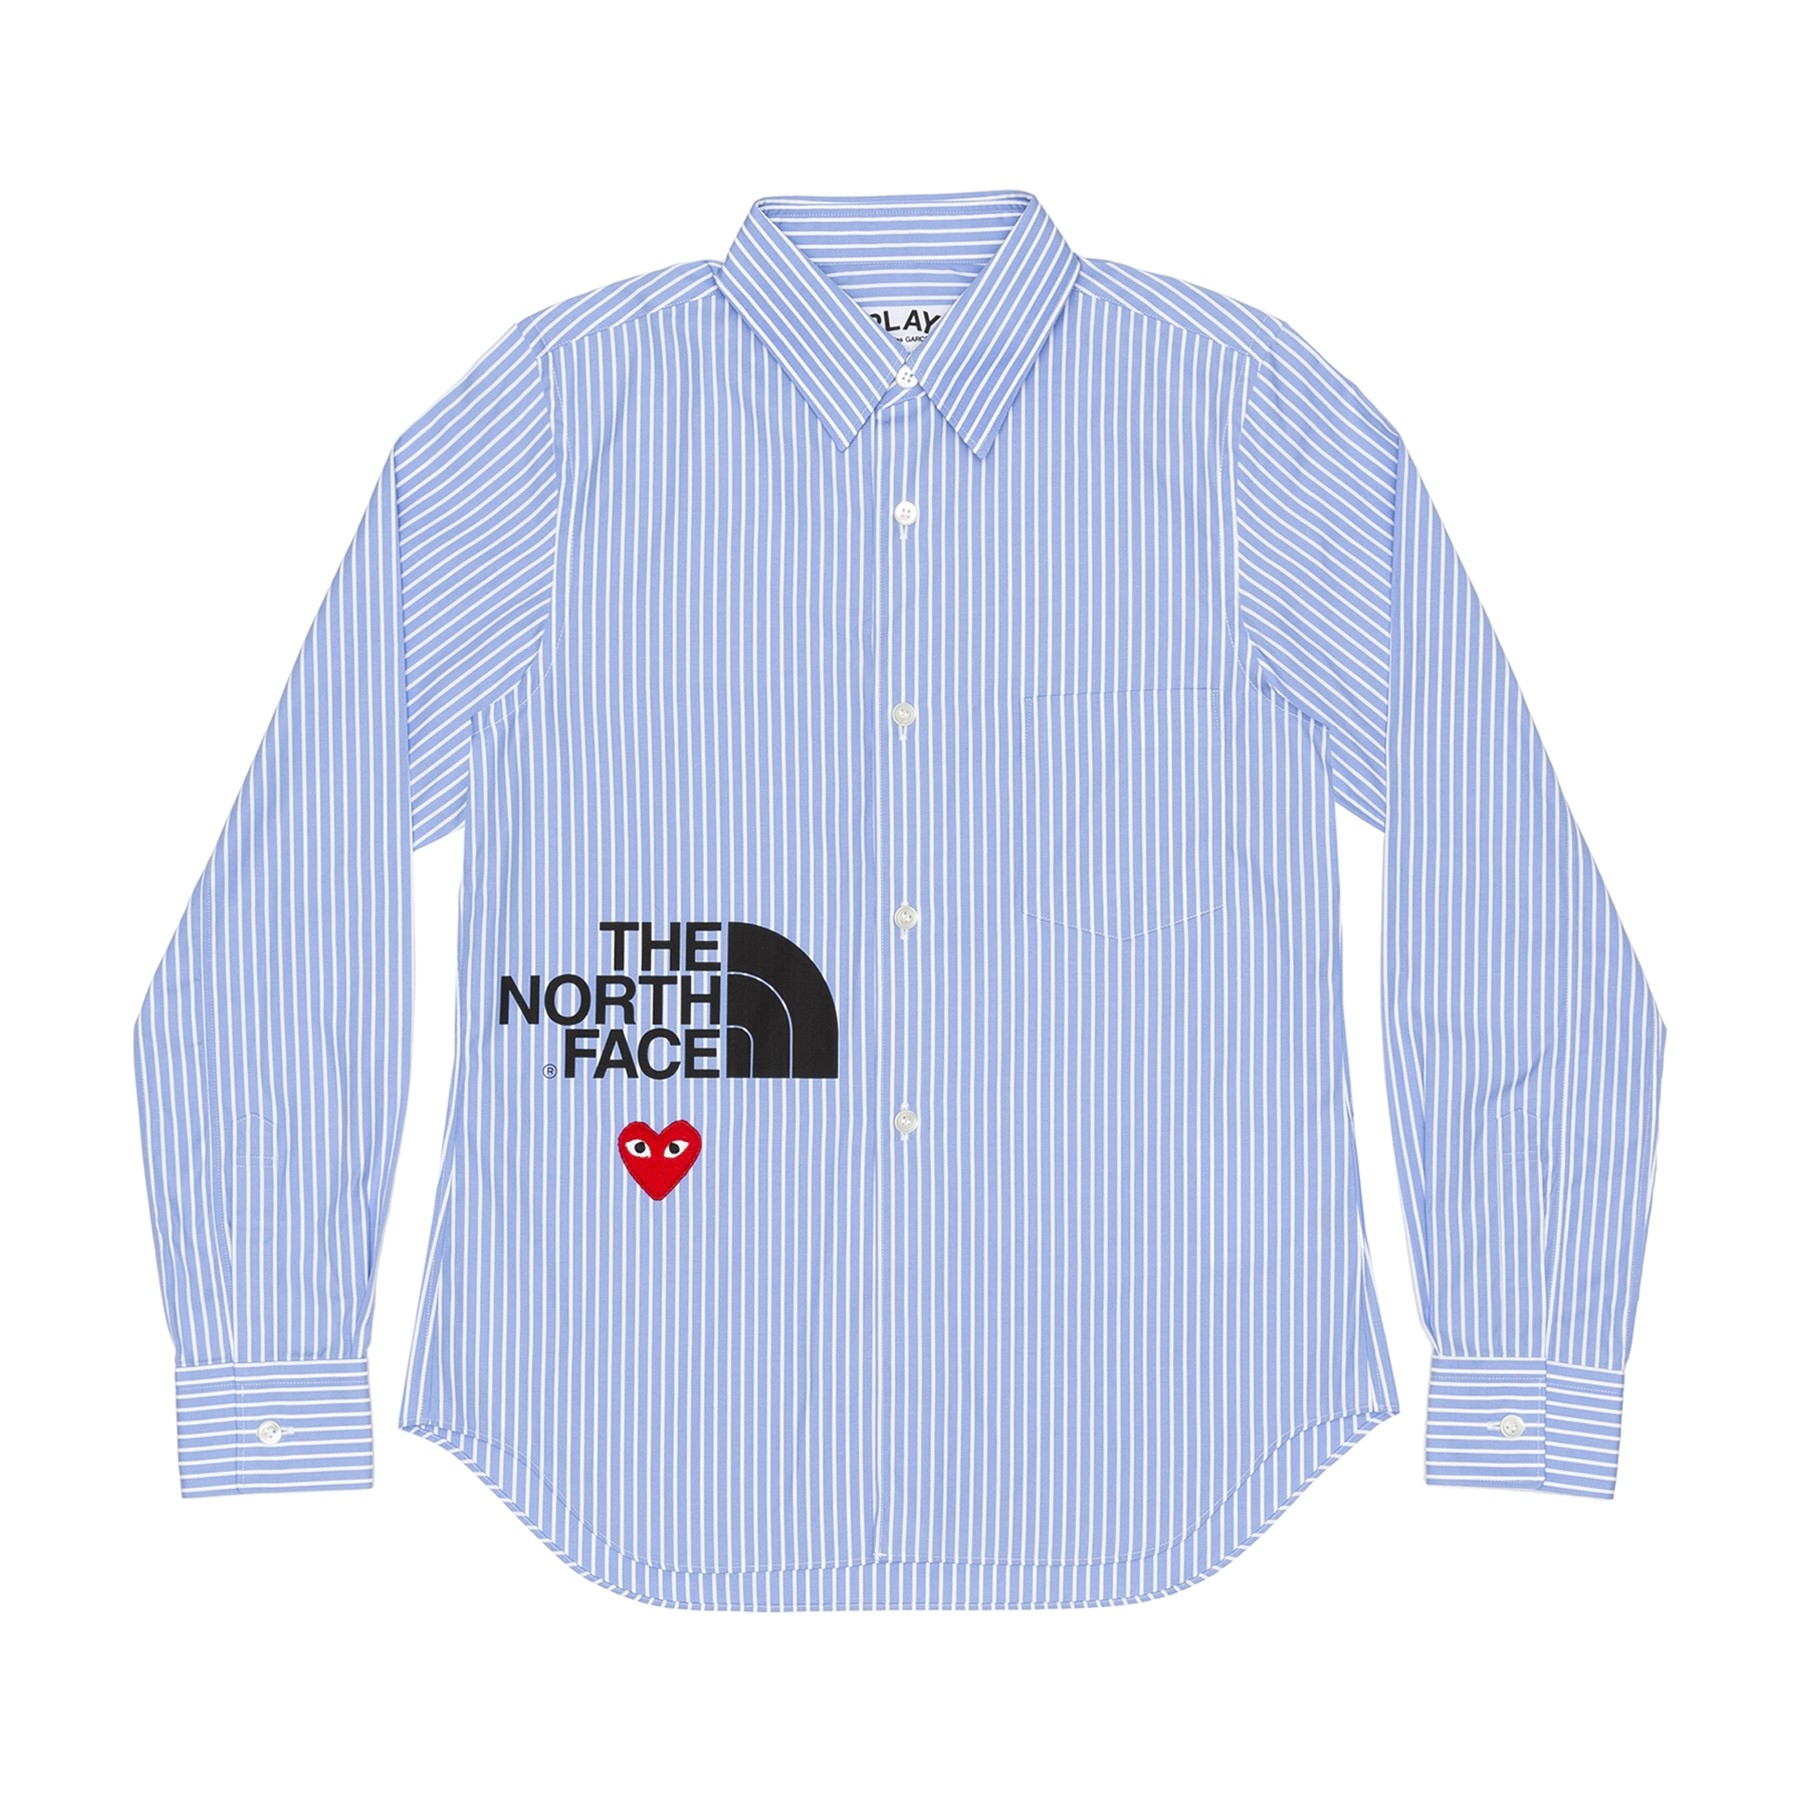 CDG x The North Face Ladies' Blouse Stripe